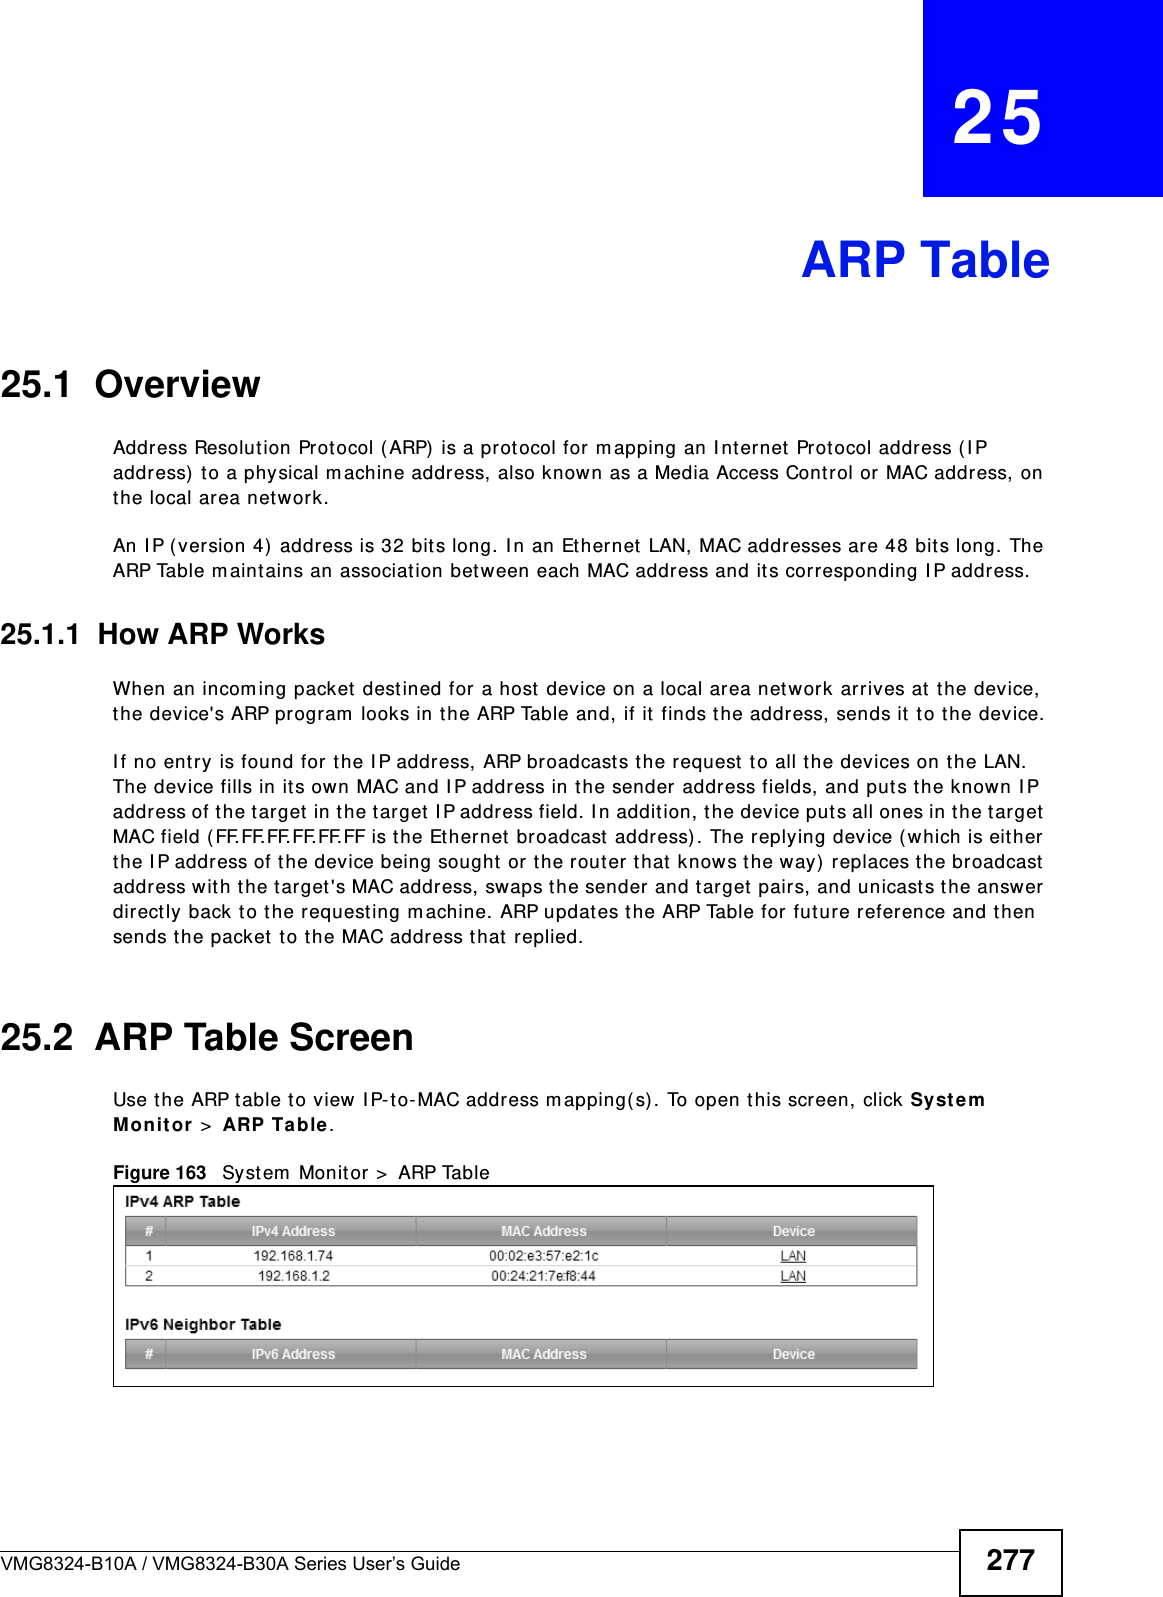 VMG8324-B10A / VMG8324-B30A Series User’s Guide 277CHAPTER   25ARP Table25.1  OverviewAddress Resolution Prot ocol ( ARP) is a prot ocol for m apping an I nternet  Protocol address ( I P address) to a physical m achine address, also known as a Media Access Control or MAC address, on the local area net work. An I P (version 4) address is 32 bits long. I n an Et hernet LAN, MAC addresses are 48 bit s long. The ARP Table m aint ains an associat ion bet ween each MAC address and its corresponding I P address.25.1.1  How ARP WorksWhen an incom ing packet dest ined for a host  device on a local area netw ork arrives at  t he device, the device&apos;s ARP program  looks in the ARP Table and, if it  finds t he address, sends it to the device.I f no entry is found for the I P address, ARP broadcast s the request to all the devices on t he LAN. The device fills in its ow n MAC and I P address in t he sender address fields, and puts t he known I P address of the t arget in t he target I P address field. I n addit ion, t he device puts all ones in t he target  M A C f i e l d  ( F F. FF. FF. FF. F F. FF i s  t h e  Et h e r n e t  b r o a d c a s t  address) . The r eplying device ( which is either the I P address of t he device being sought or the router that knows the way) replaces the broadcast  address wit h t he target &apos;s MAC address, swaps t he sender and target  pairs, and unicasts t he answer directly back t o the requesting m achine. ARP updat es the ARP Table for future reference and t hen sends t he packet to the MAC address t hat  replied. 25.2  ARP Table ScreenUse t he ARP t able to view I P- to- MAC address m apping( s) . To open this screen, click Syst em  M on it o r &gt;  ARP Ta ble.Figure 163   Syst em  Monitor &gt;  ARP Table